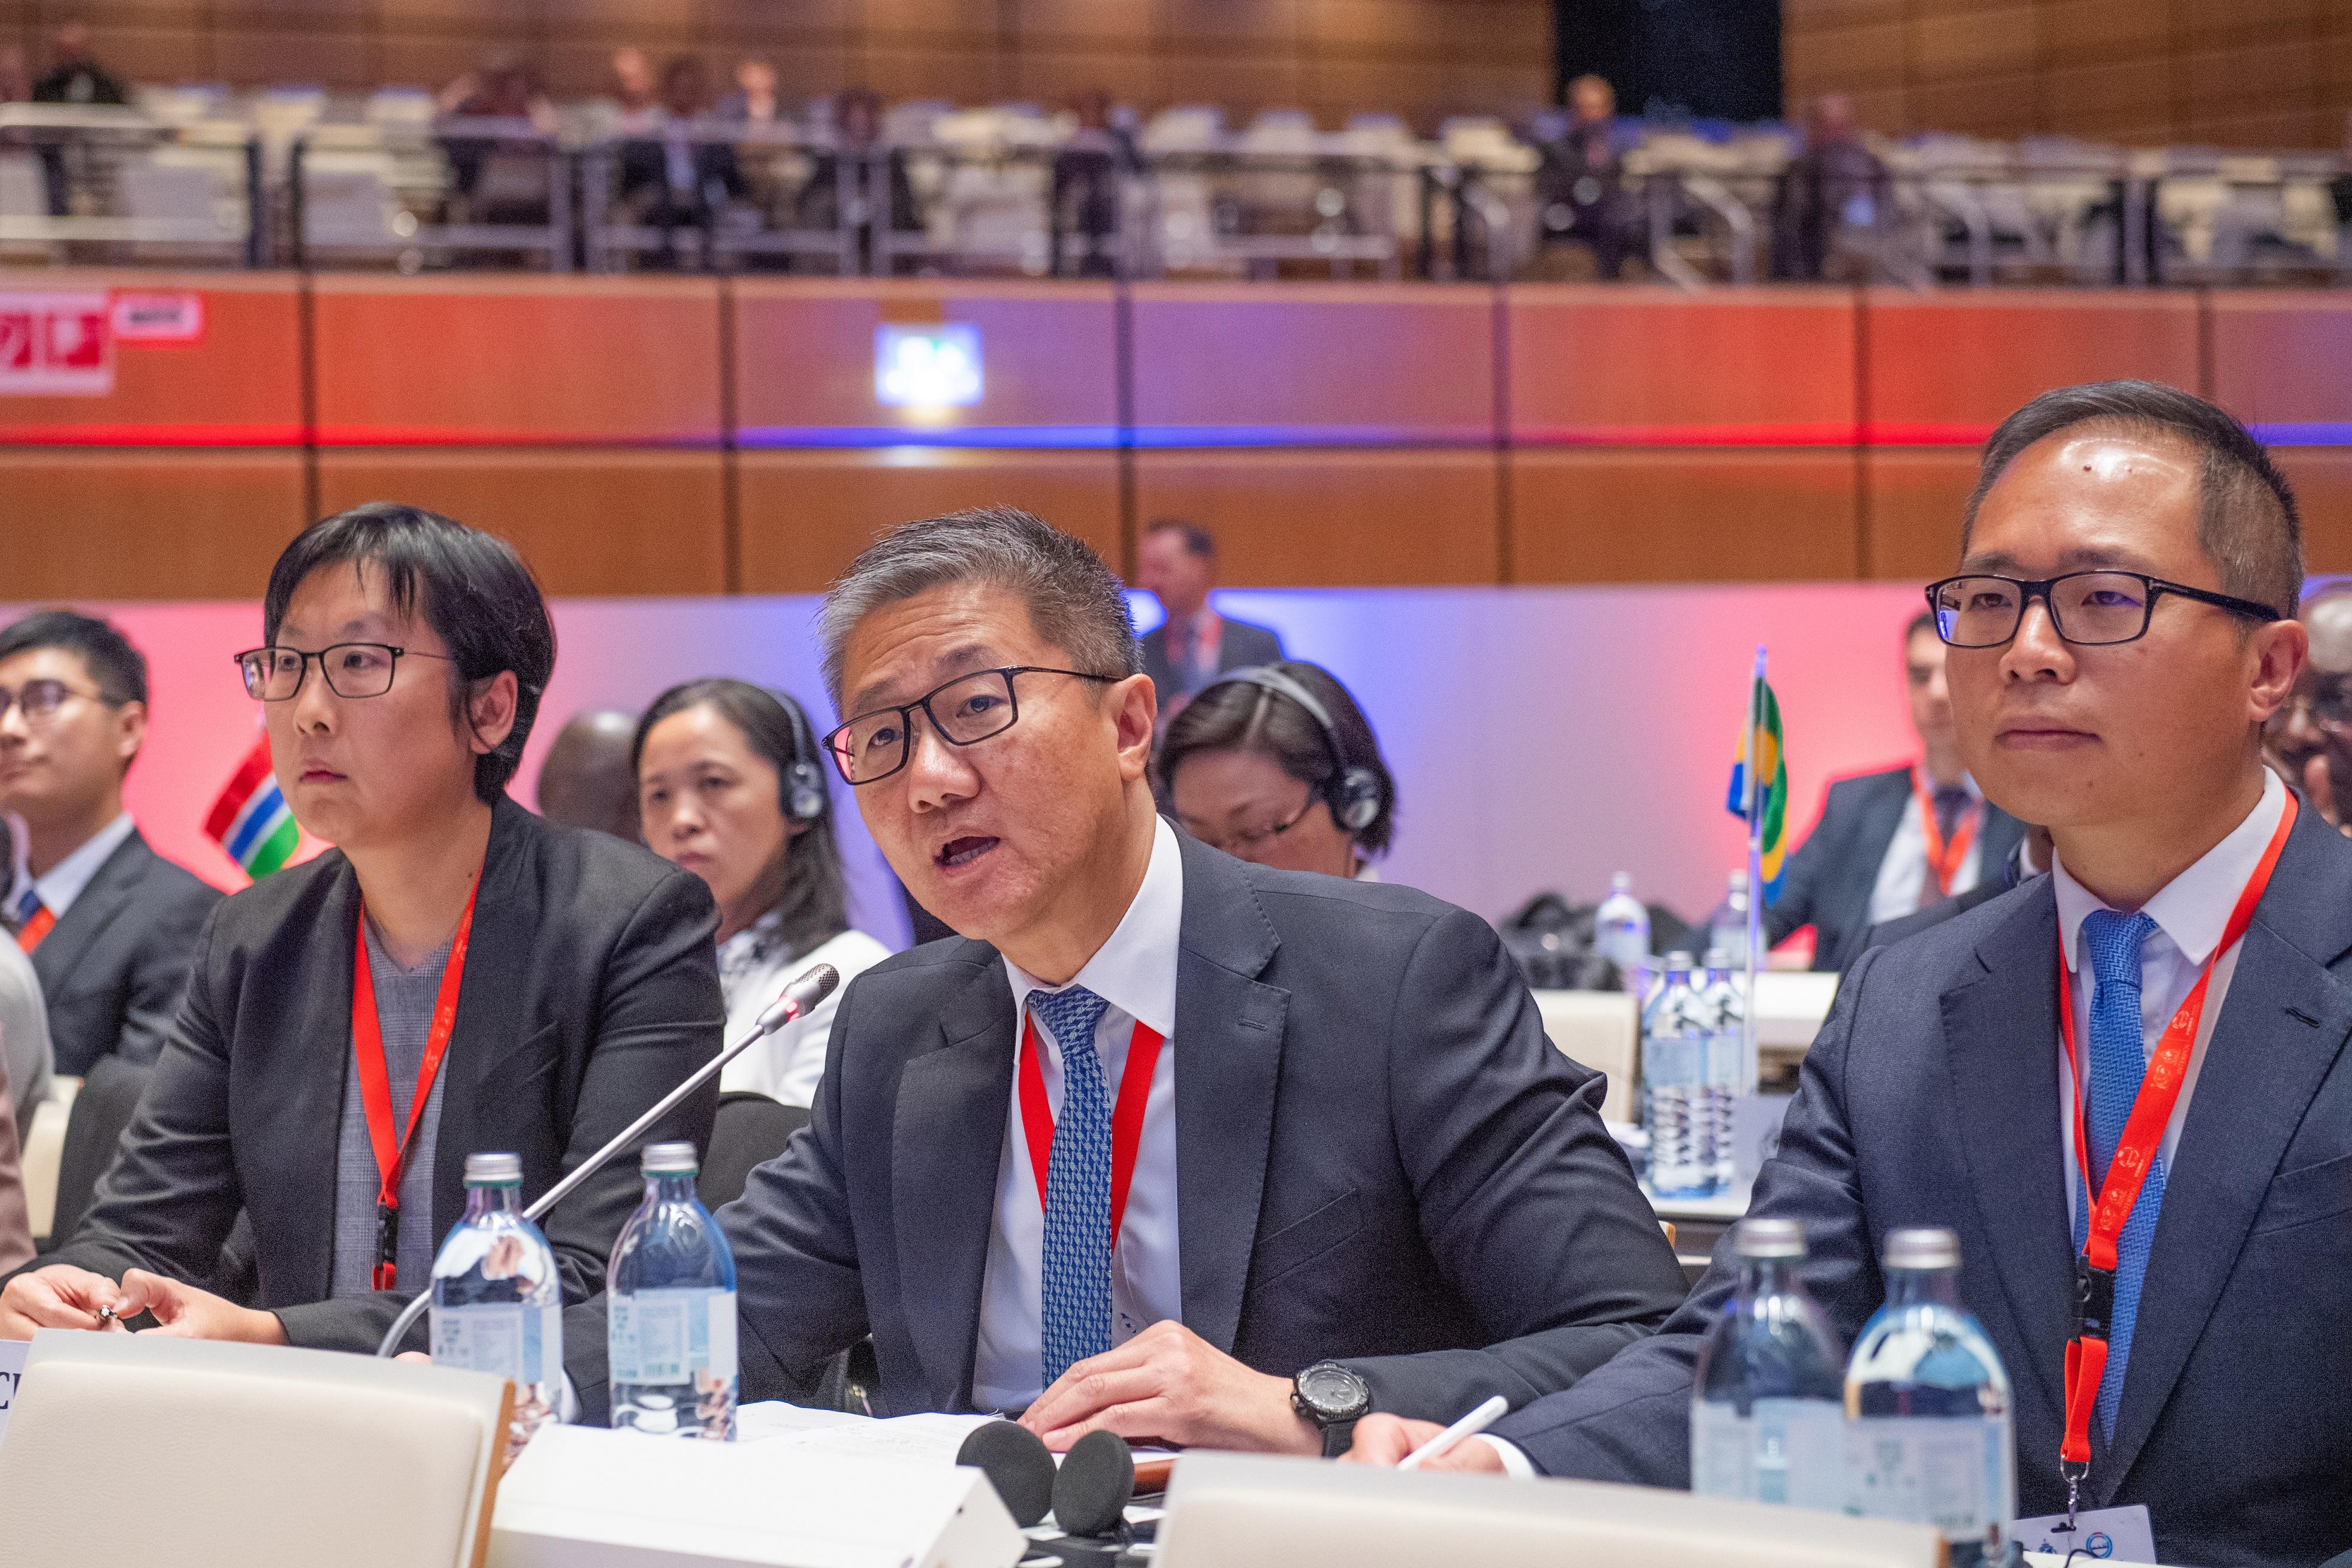 The Commissioner of Police, Mr Siu Chak-yee (centre); Assistant Commissioner (Crime), Ms Chung Wing-man (left); and Regional Commander (Kowloon East), Dr Law Yuet-wing (right) attended the 91st INTERPOL General Assembly in Vienna, Austria from November 28 to December 1.